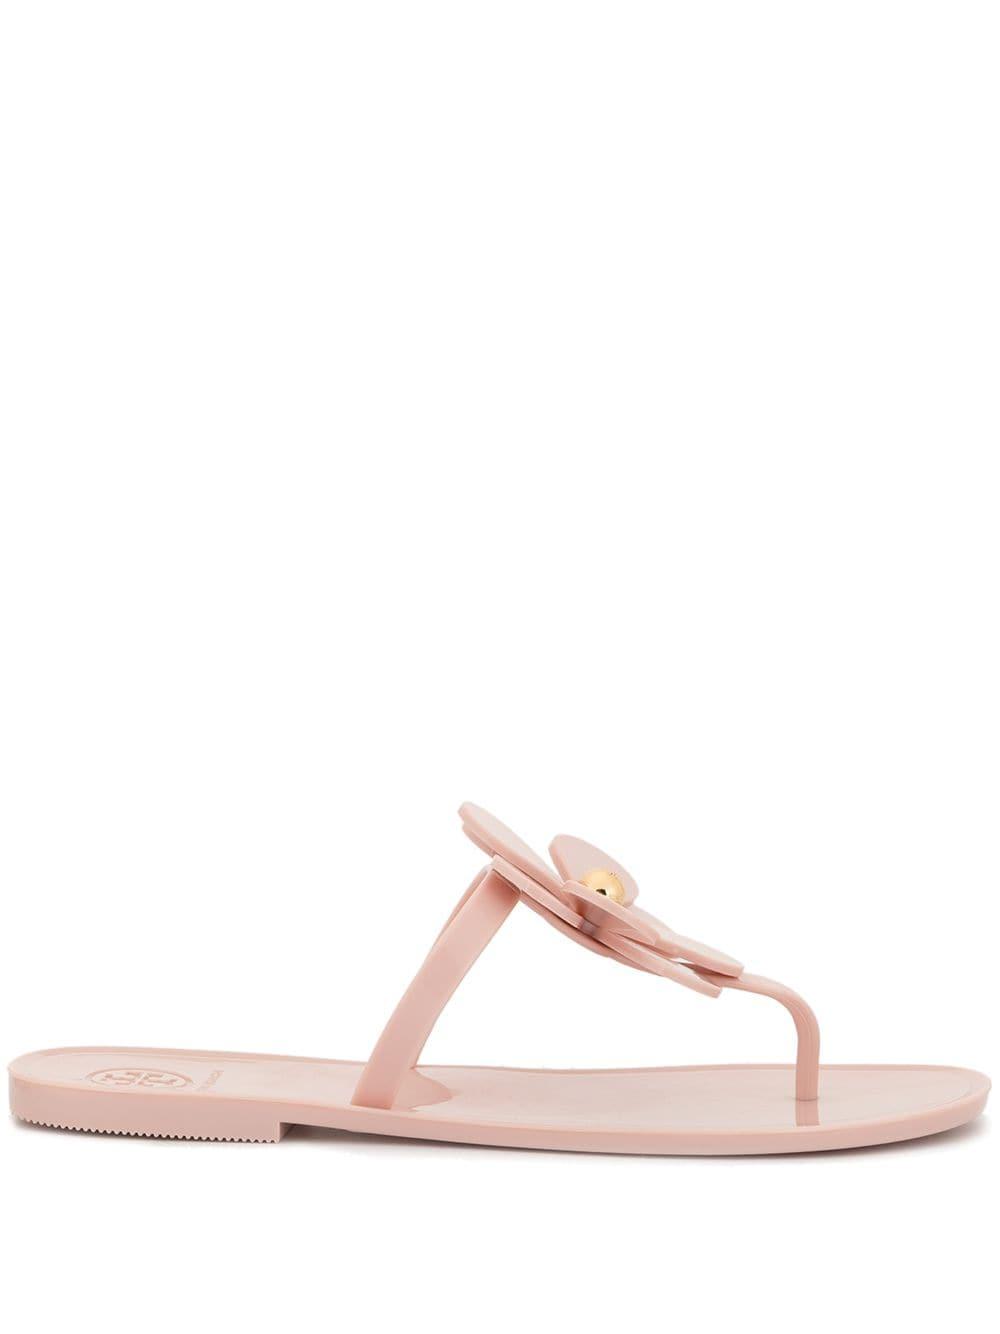 Tory Burch Flower Jelly Sandals in Pink | Lyst